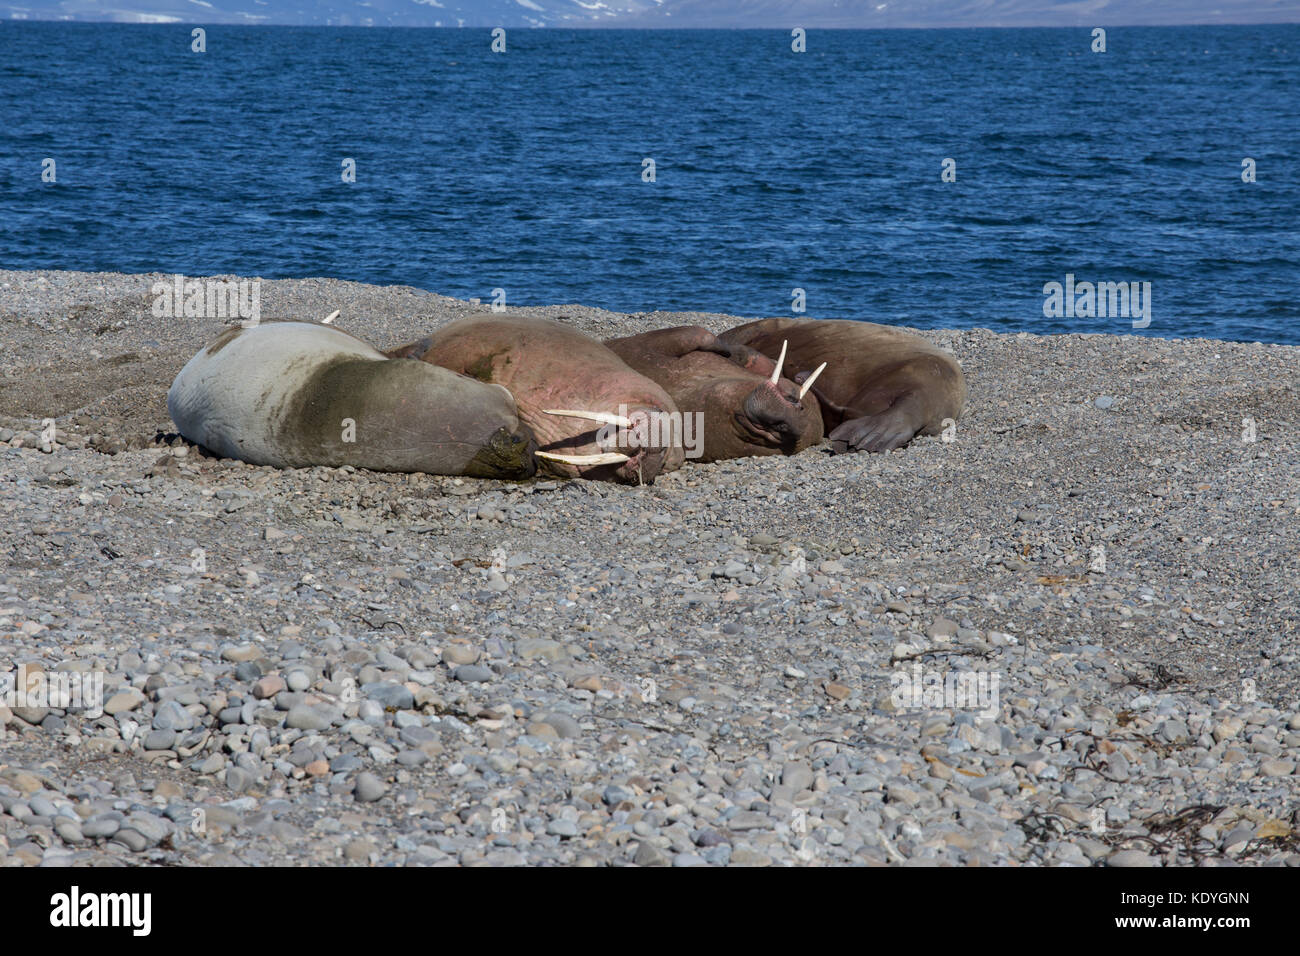 Four male walruses 'hauled-out' on the beach in Spitsbergen, Svalbard. Stock Photo